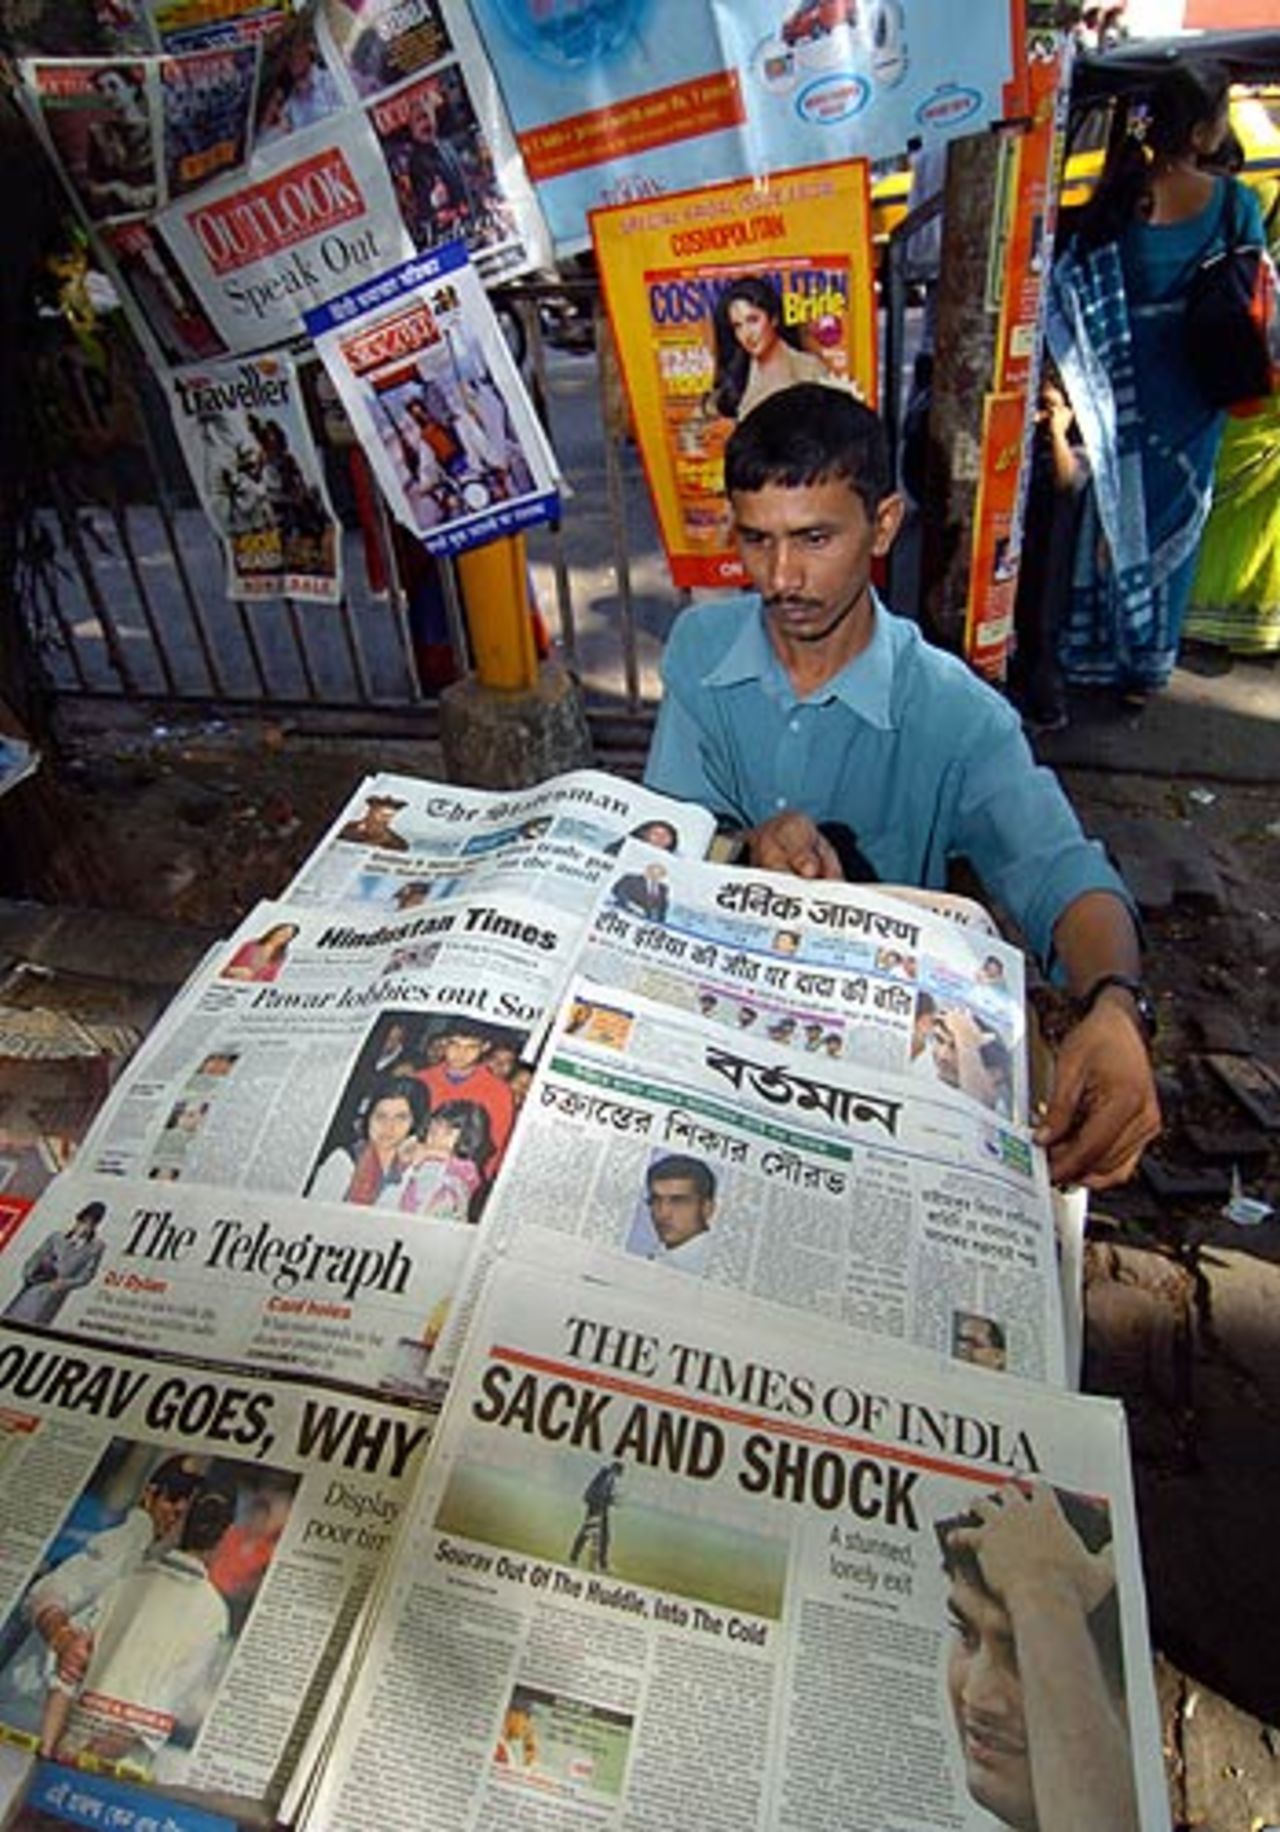 Sourav Ganguly's axeing is front-page news in India, December 15, 2005